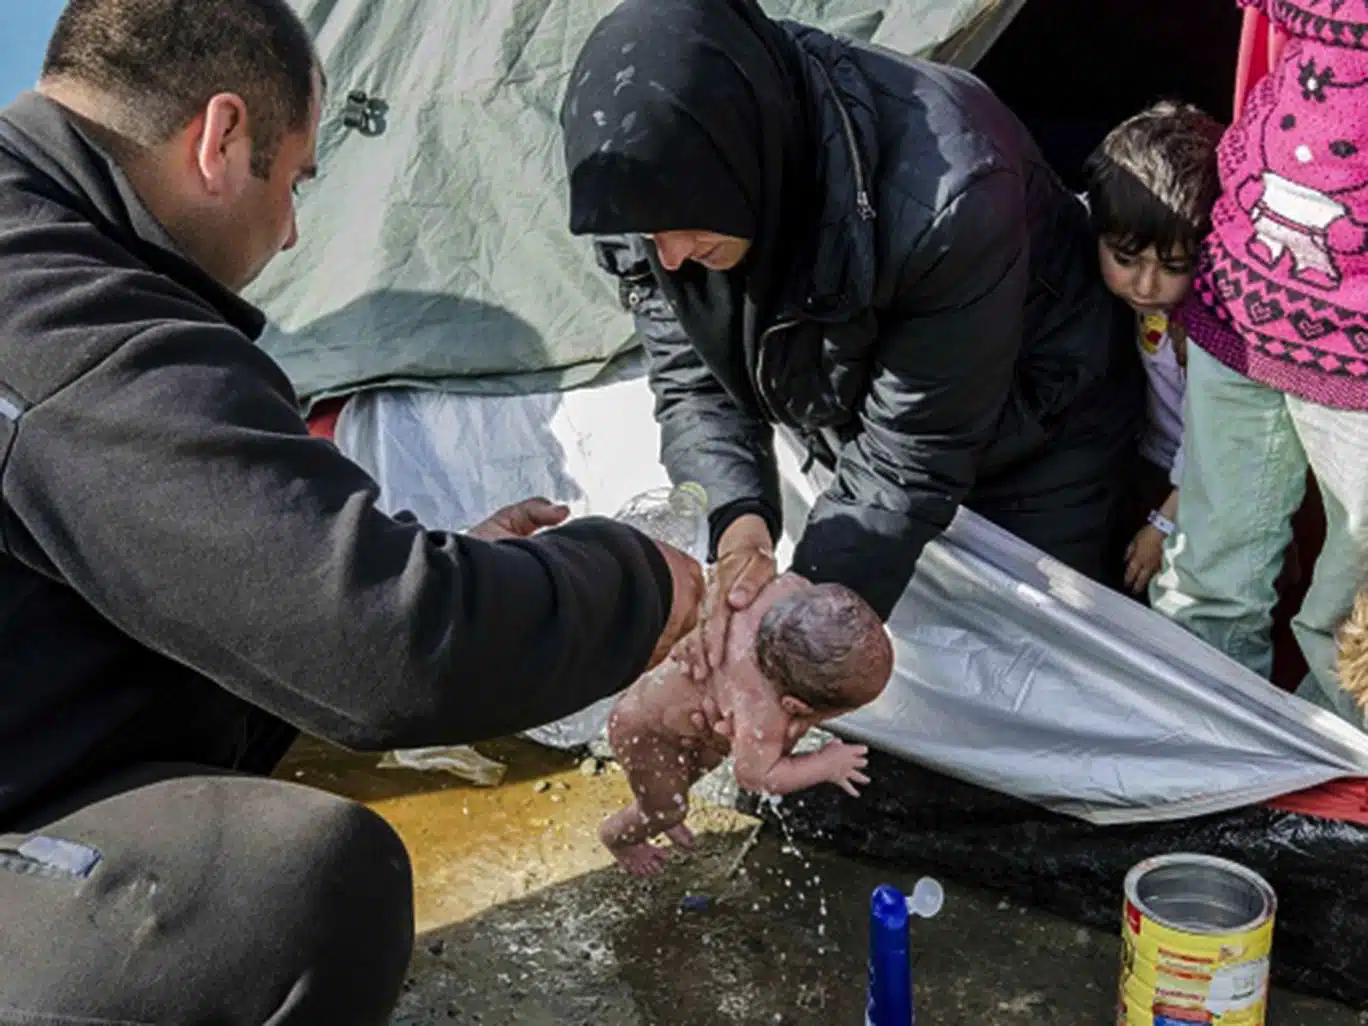 The Syrian baby boy Bayan was photographed being washed